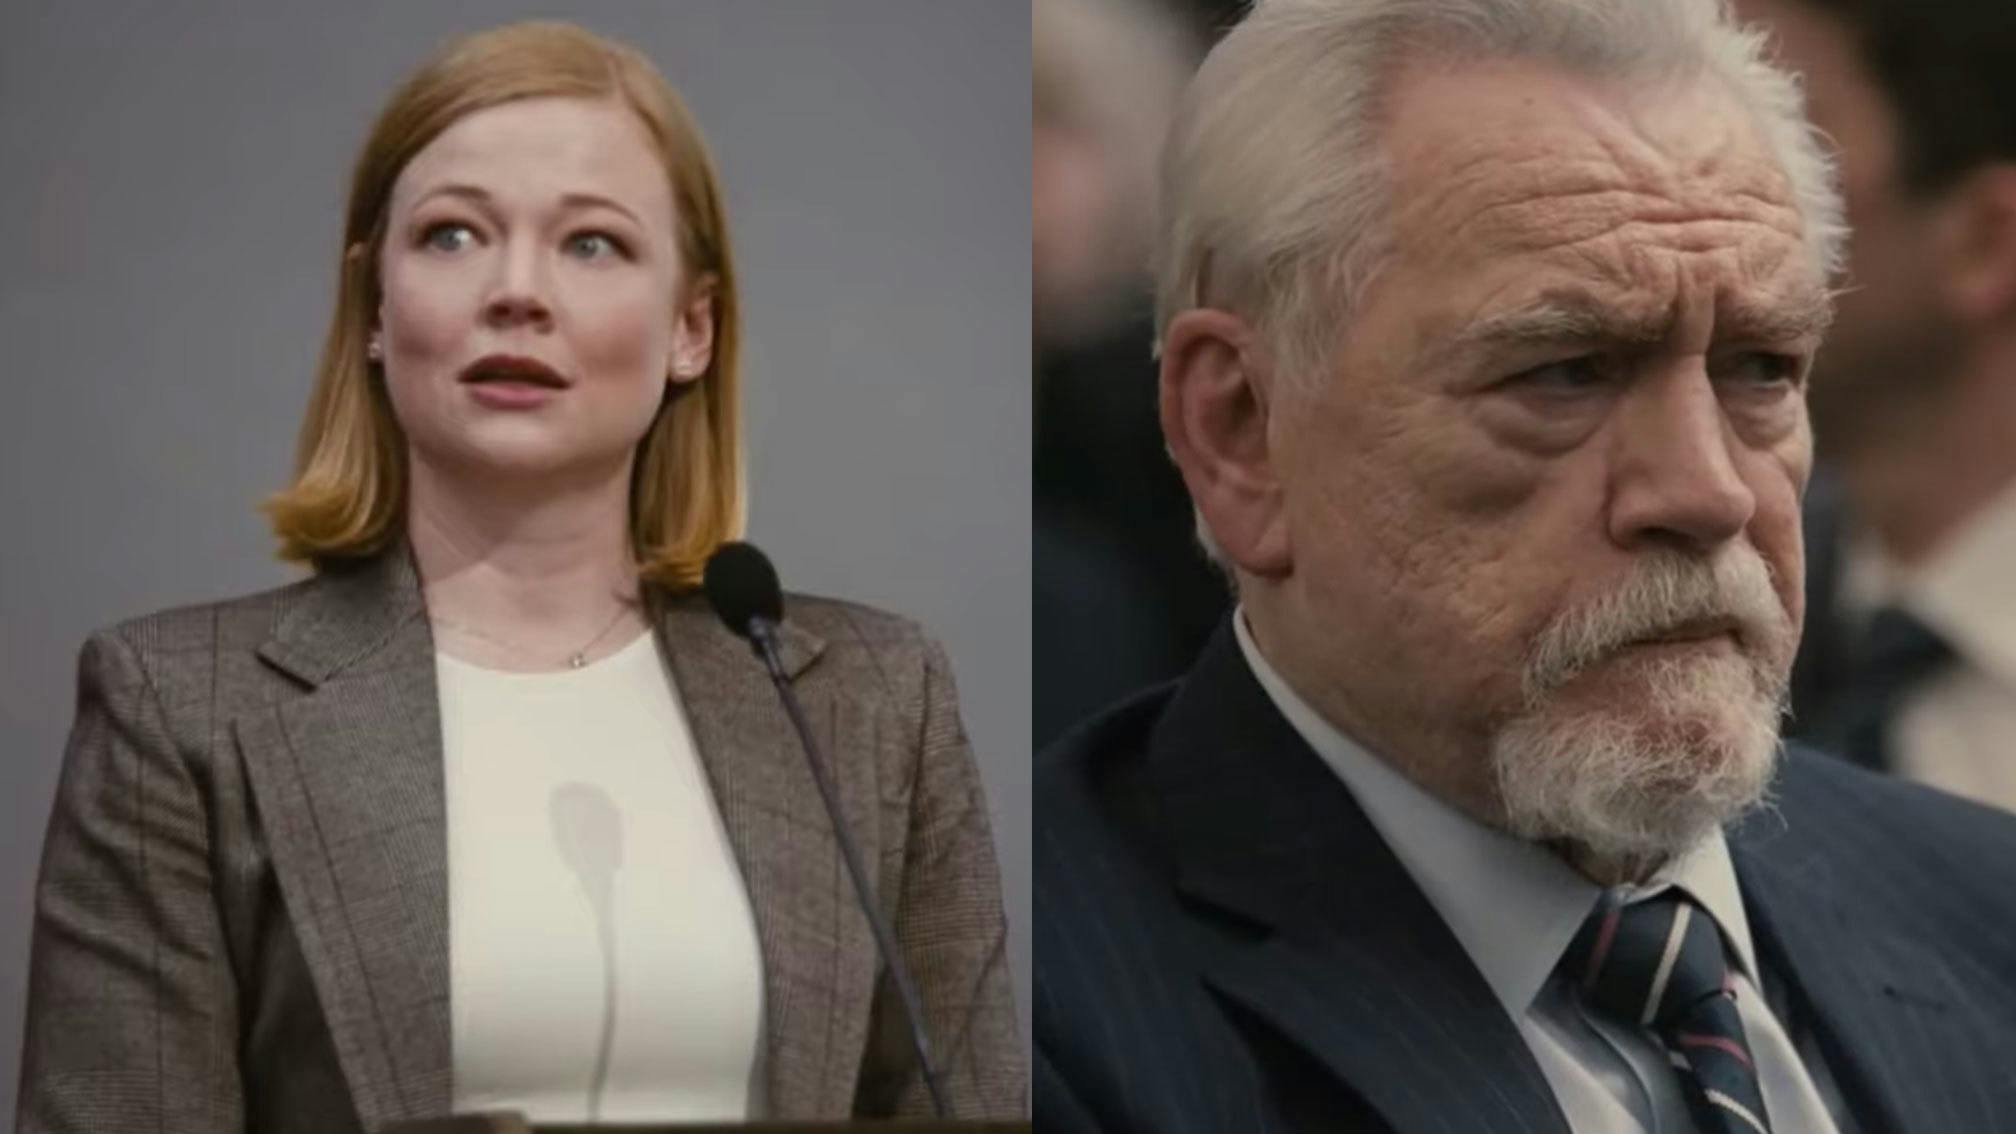 Nirvana's Rape Me played in key scene in latest episode of Succession